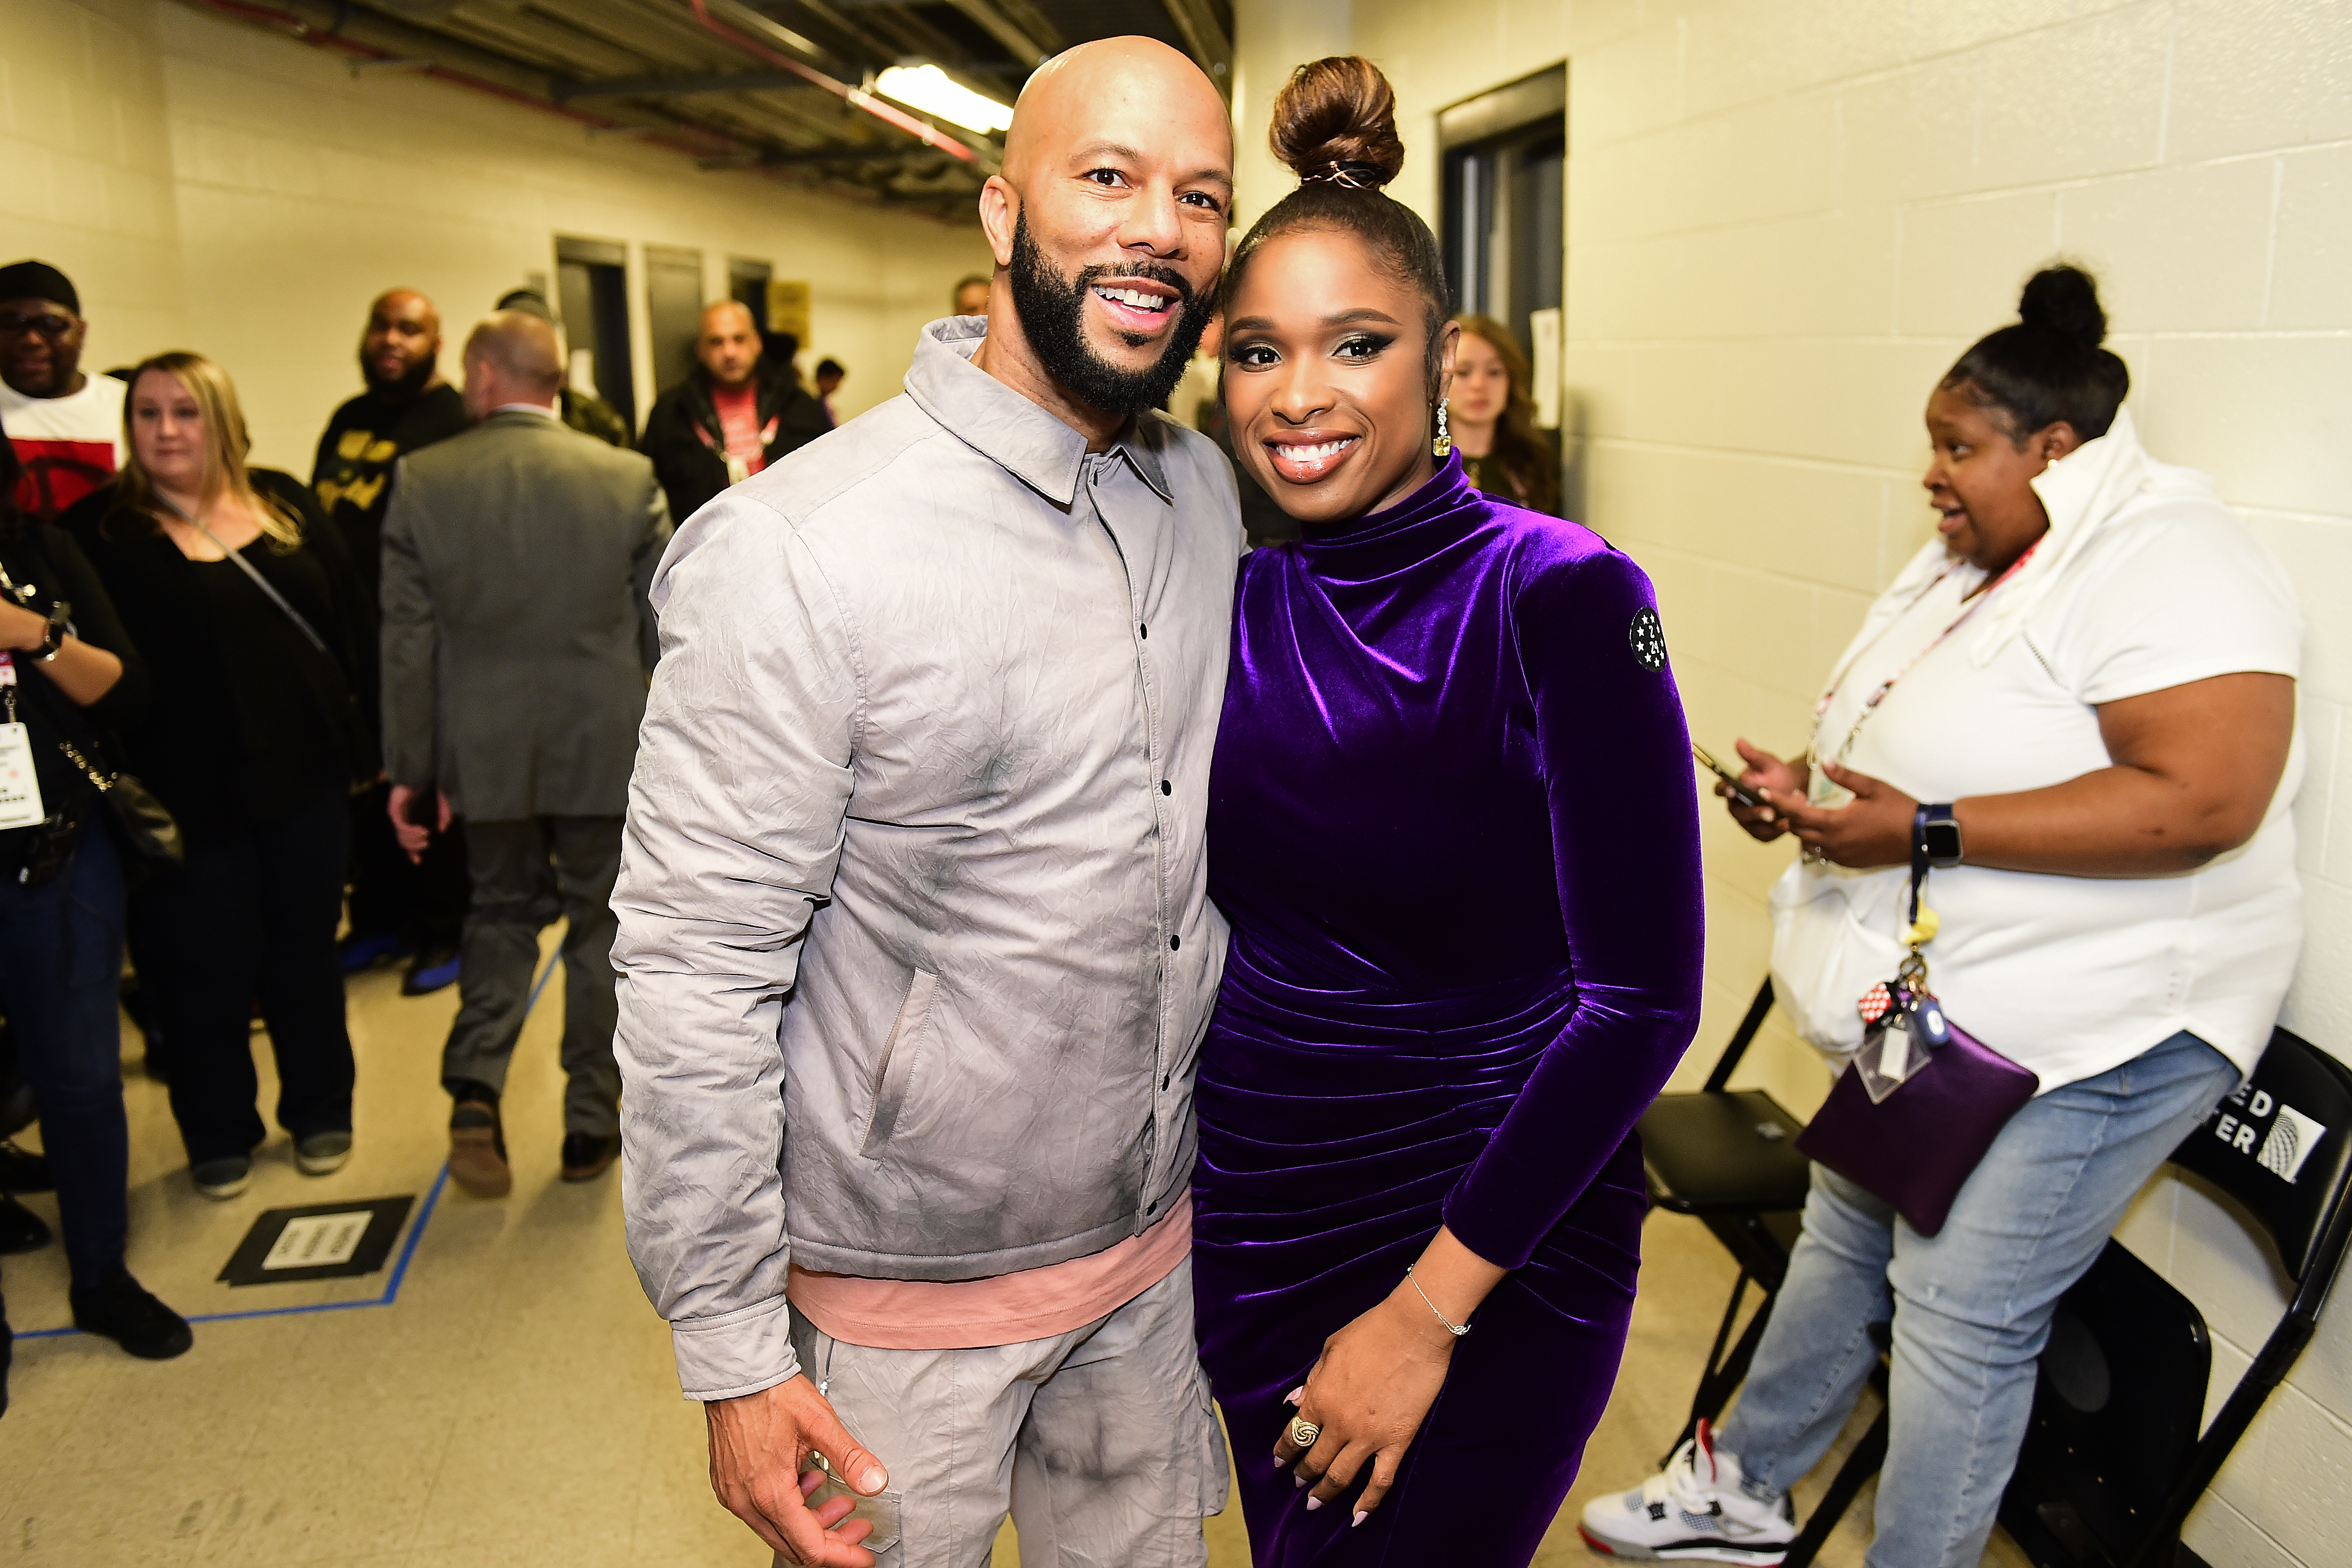 Rapper Common with Jennifer Hudson at an NBA All-Star Game on February 16, 2020 in Chicago, Illinois. | Source: Getty Images